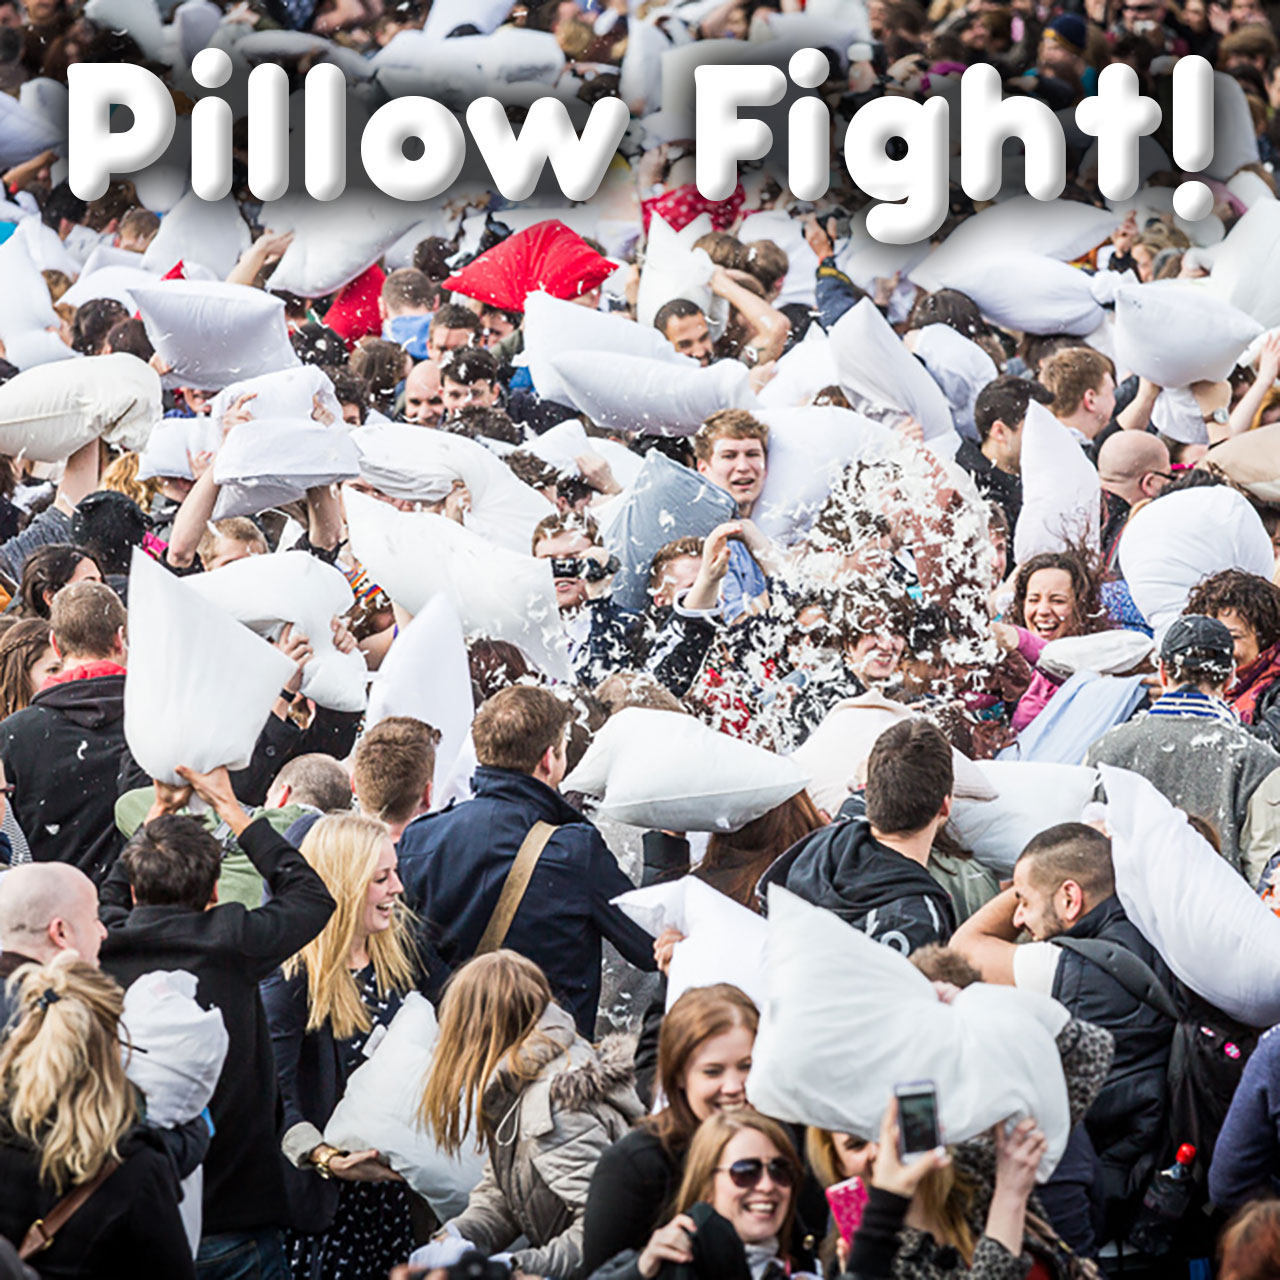 Pillow Fight Softest Martial Art Spills Out Of Bedrooms And Into The Streets